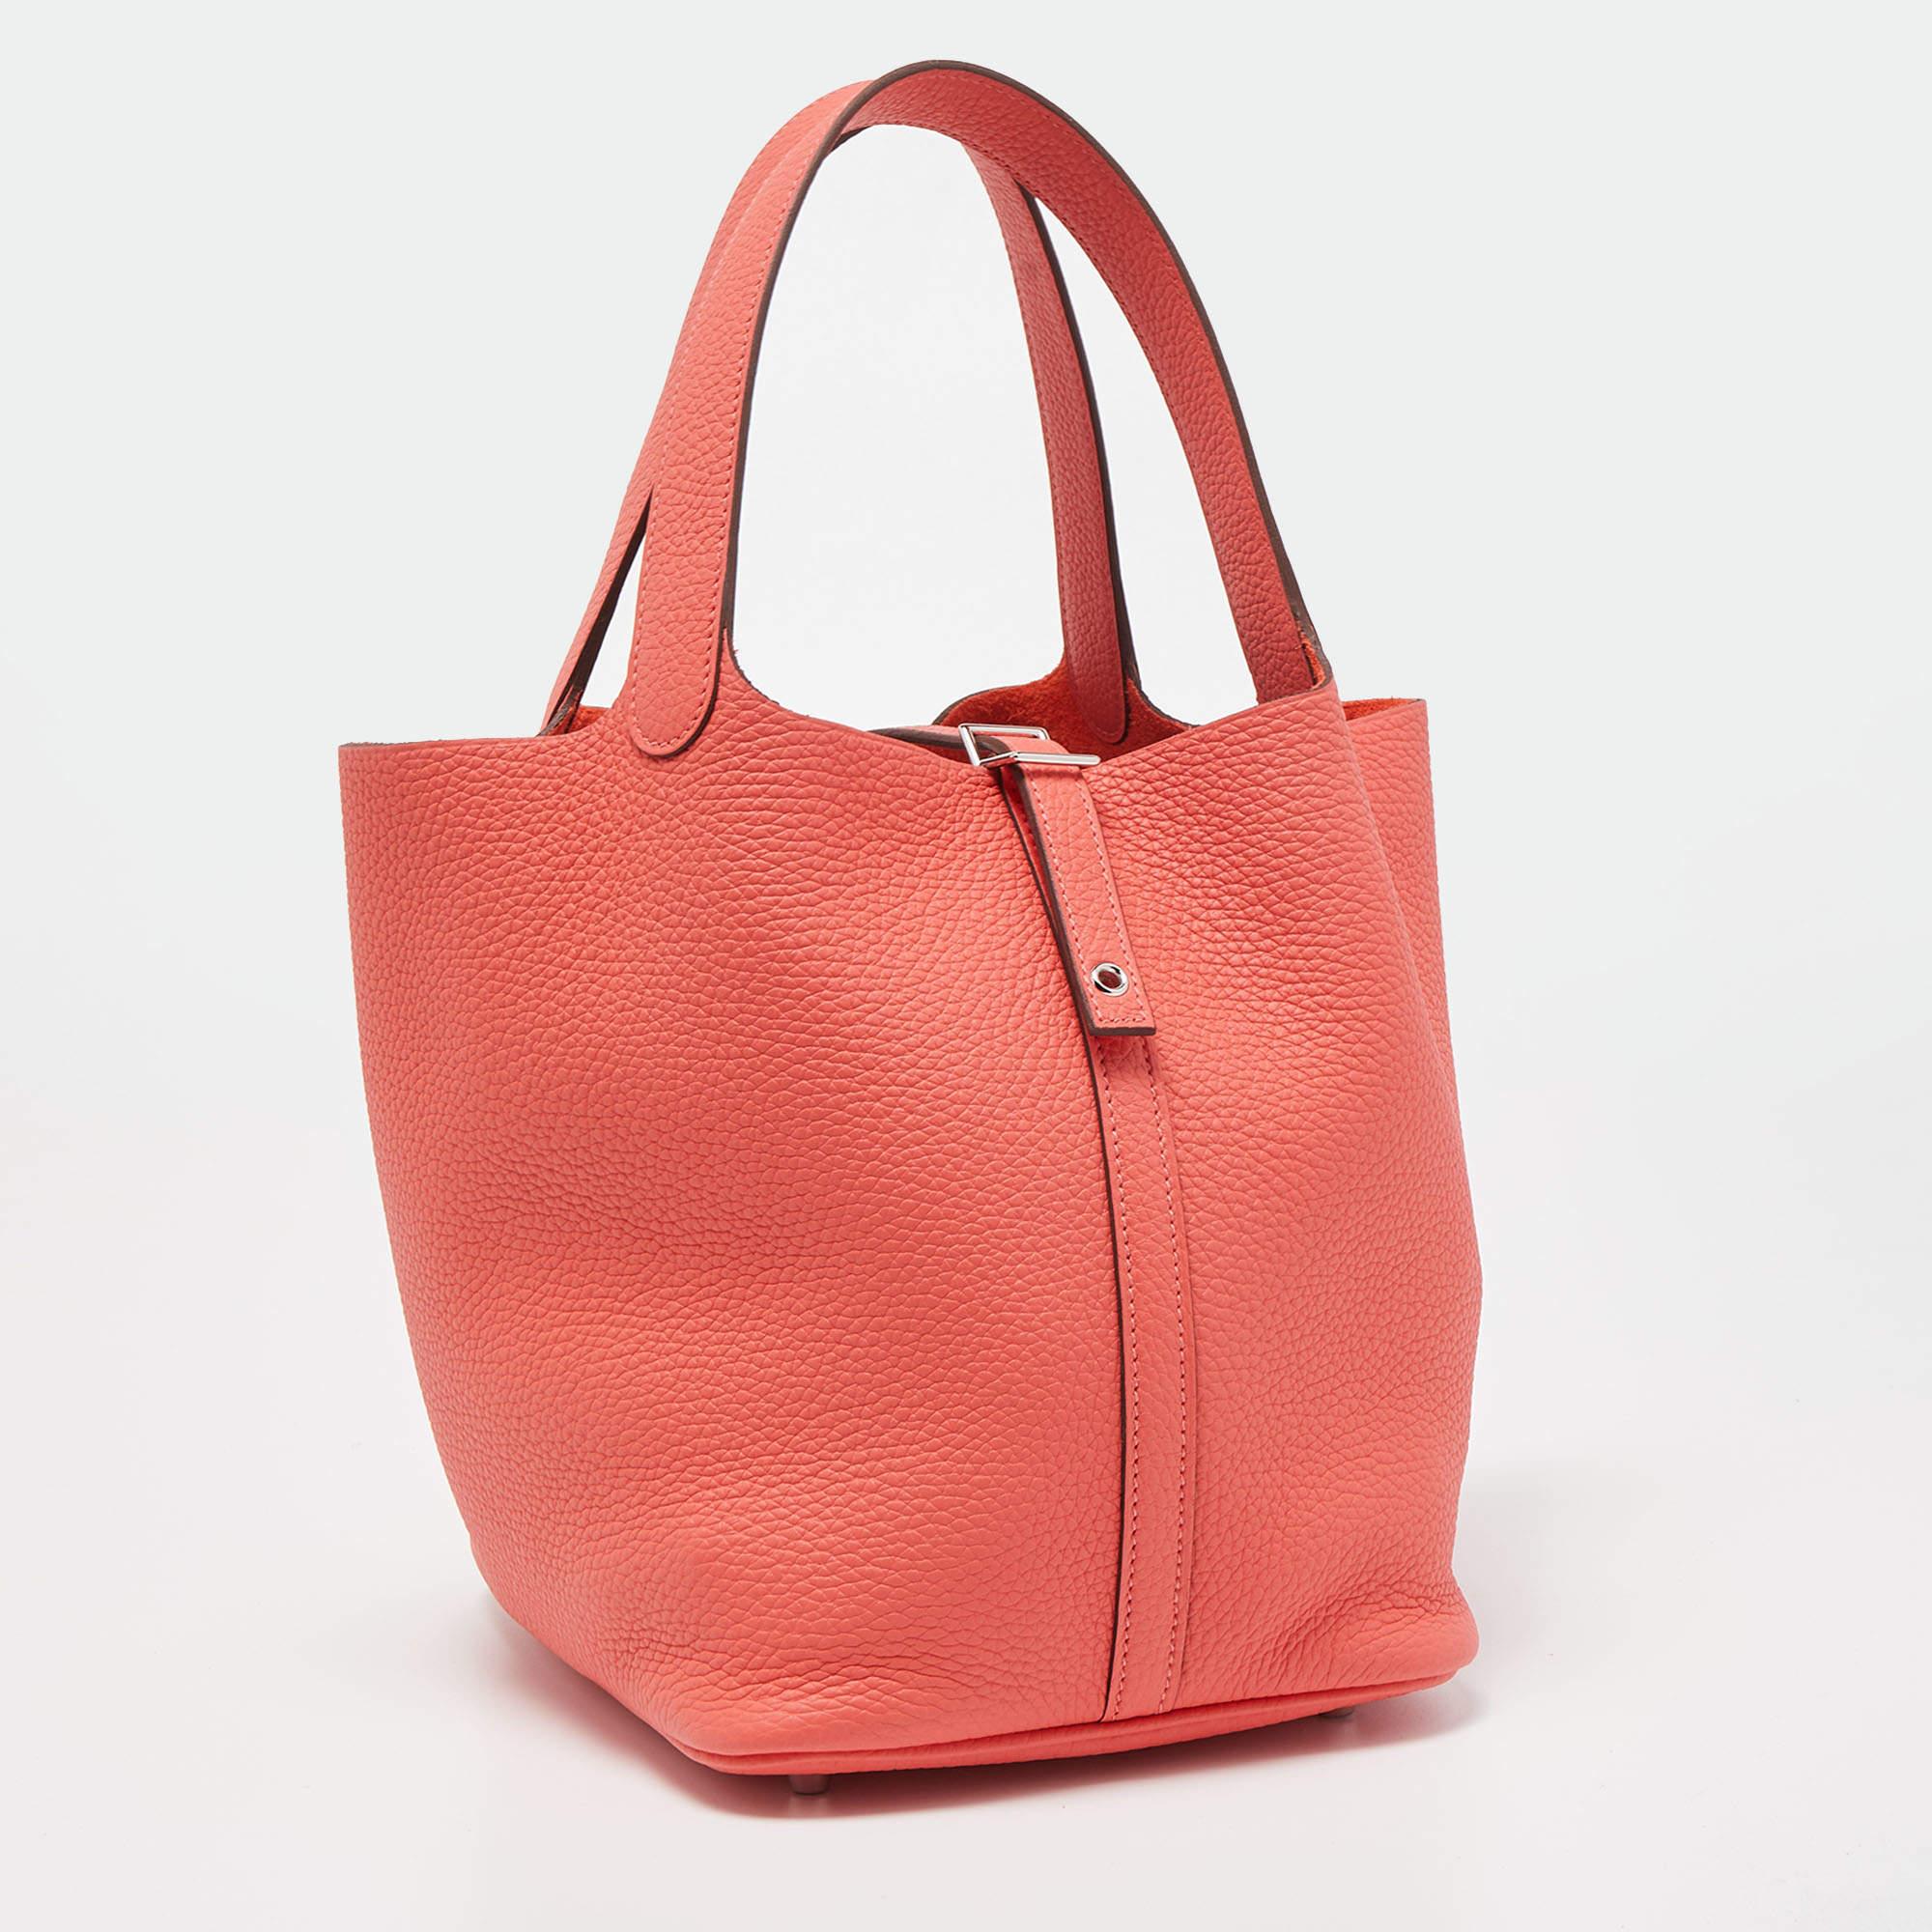 The Hermès Picotin Lock 22 bag is an exquisite accessory, showcasing impeccable craftsmanship and luxury. Crafted from rich Taurillon Clemence leather in a vibrant Rose Texas hue, it features a distinctive basket shape with a secure Picotin Lock